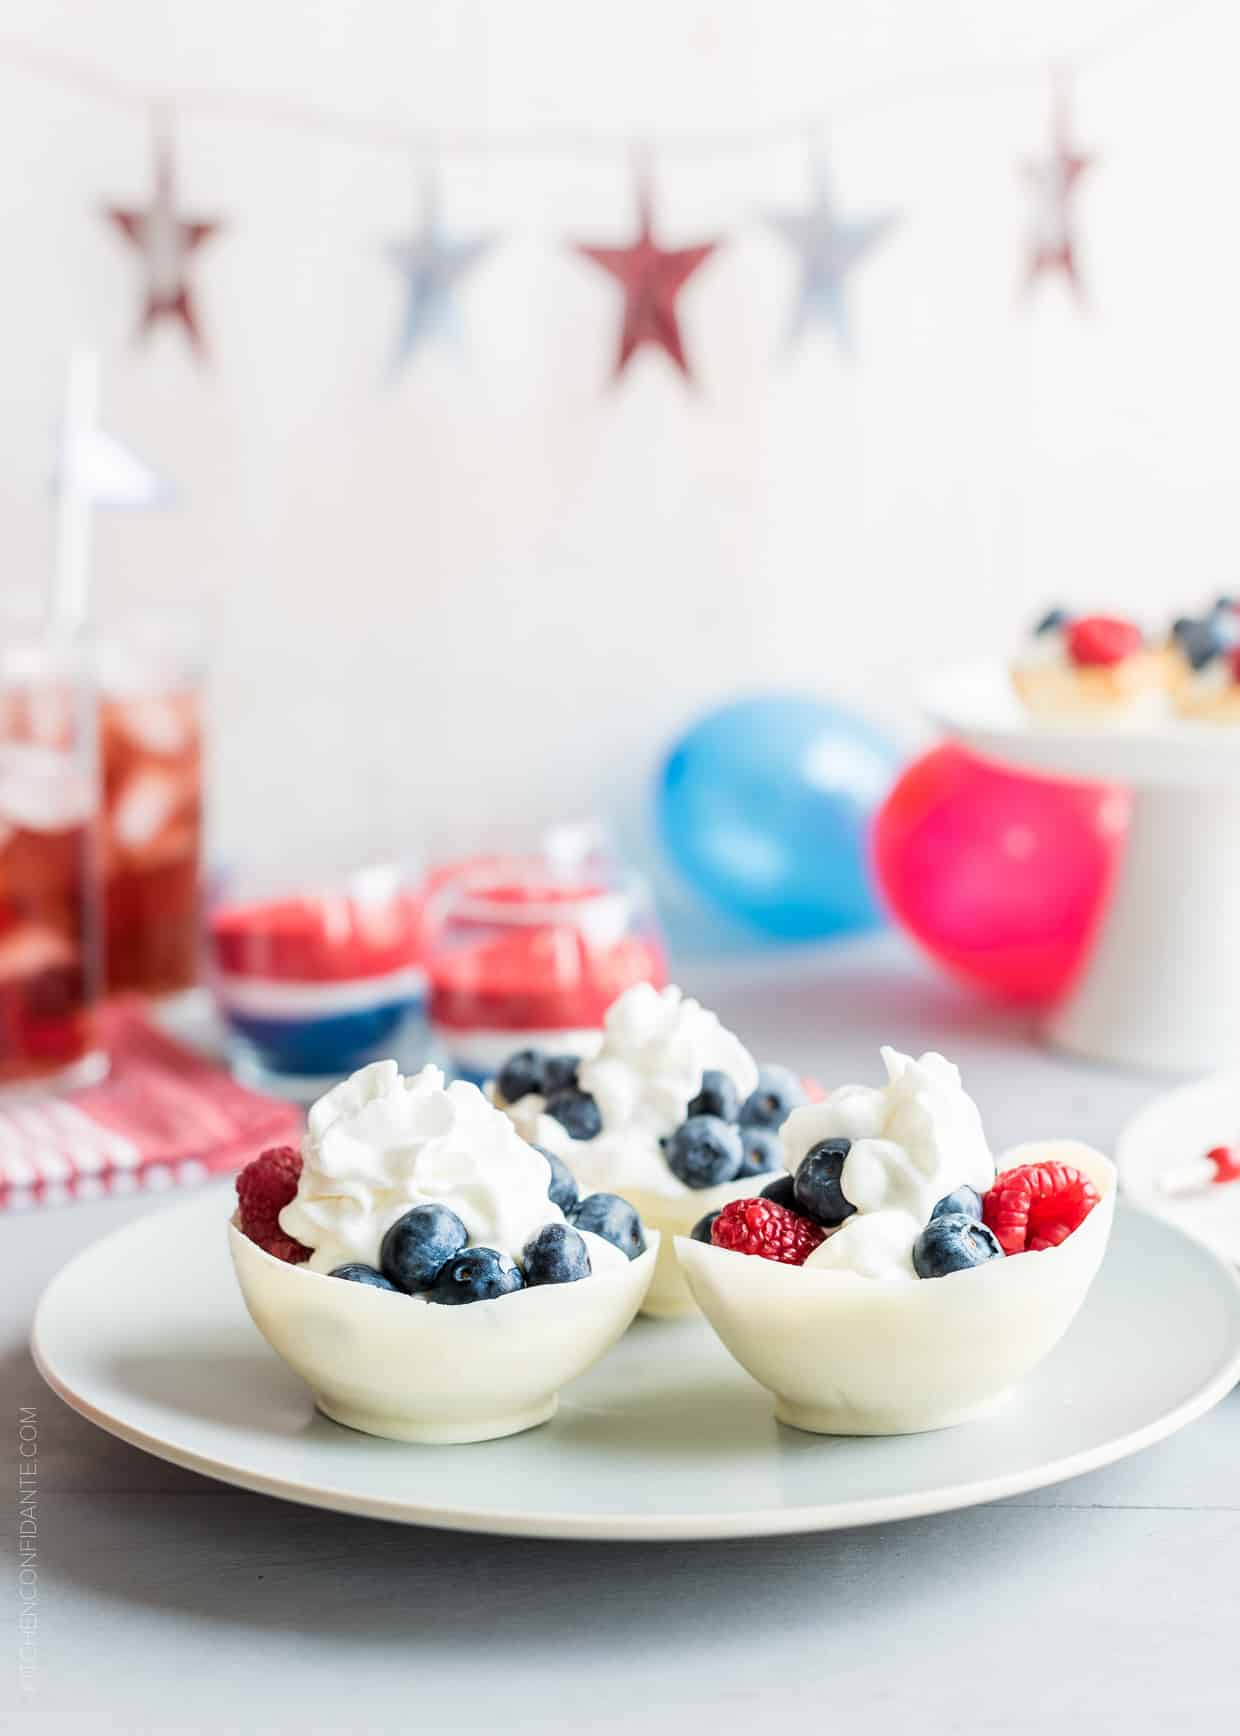 5 Ways to Go Red White and Blue for the 4th of July - Whether you’re hosting a gathering with family and friends, packing a picnic to head to the beach, or lining your streets to watch a parade and fireworks, here are five fun ways to go red white and blue crazy on the 4th of July!